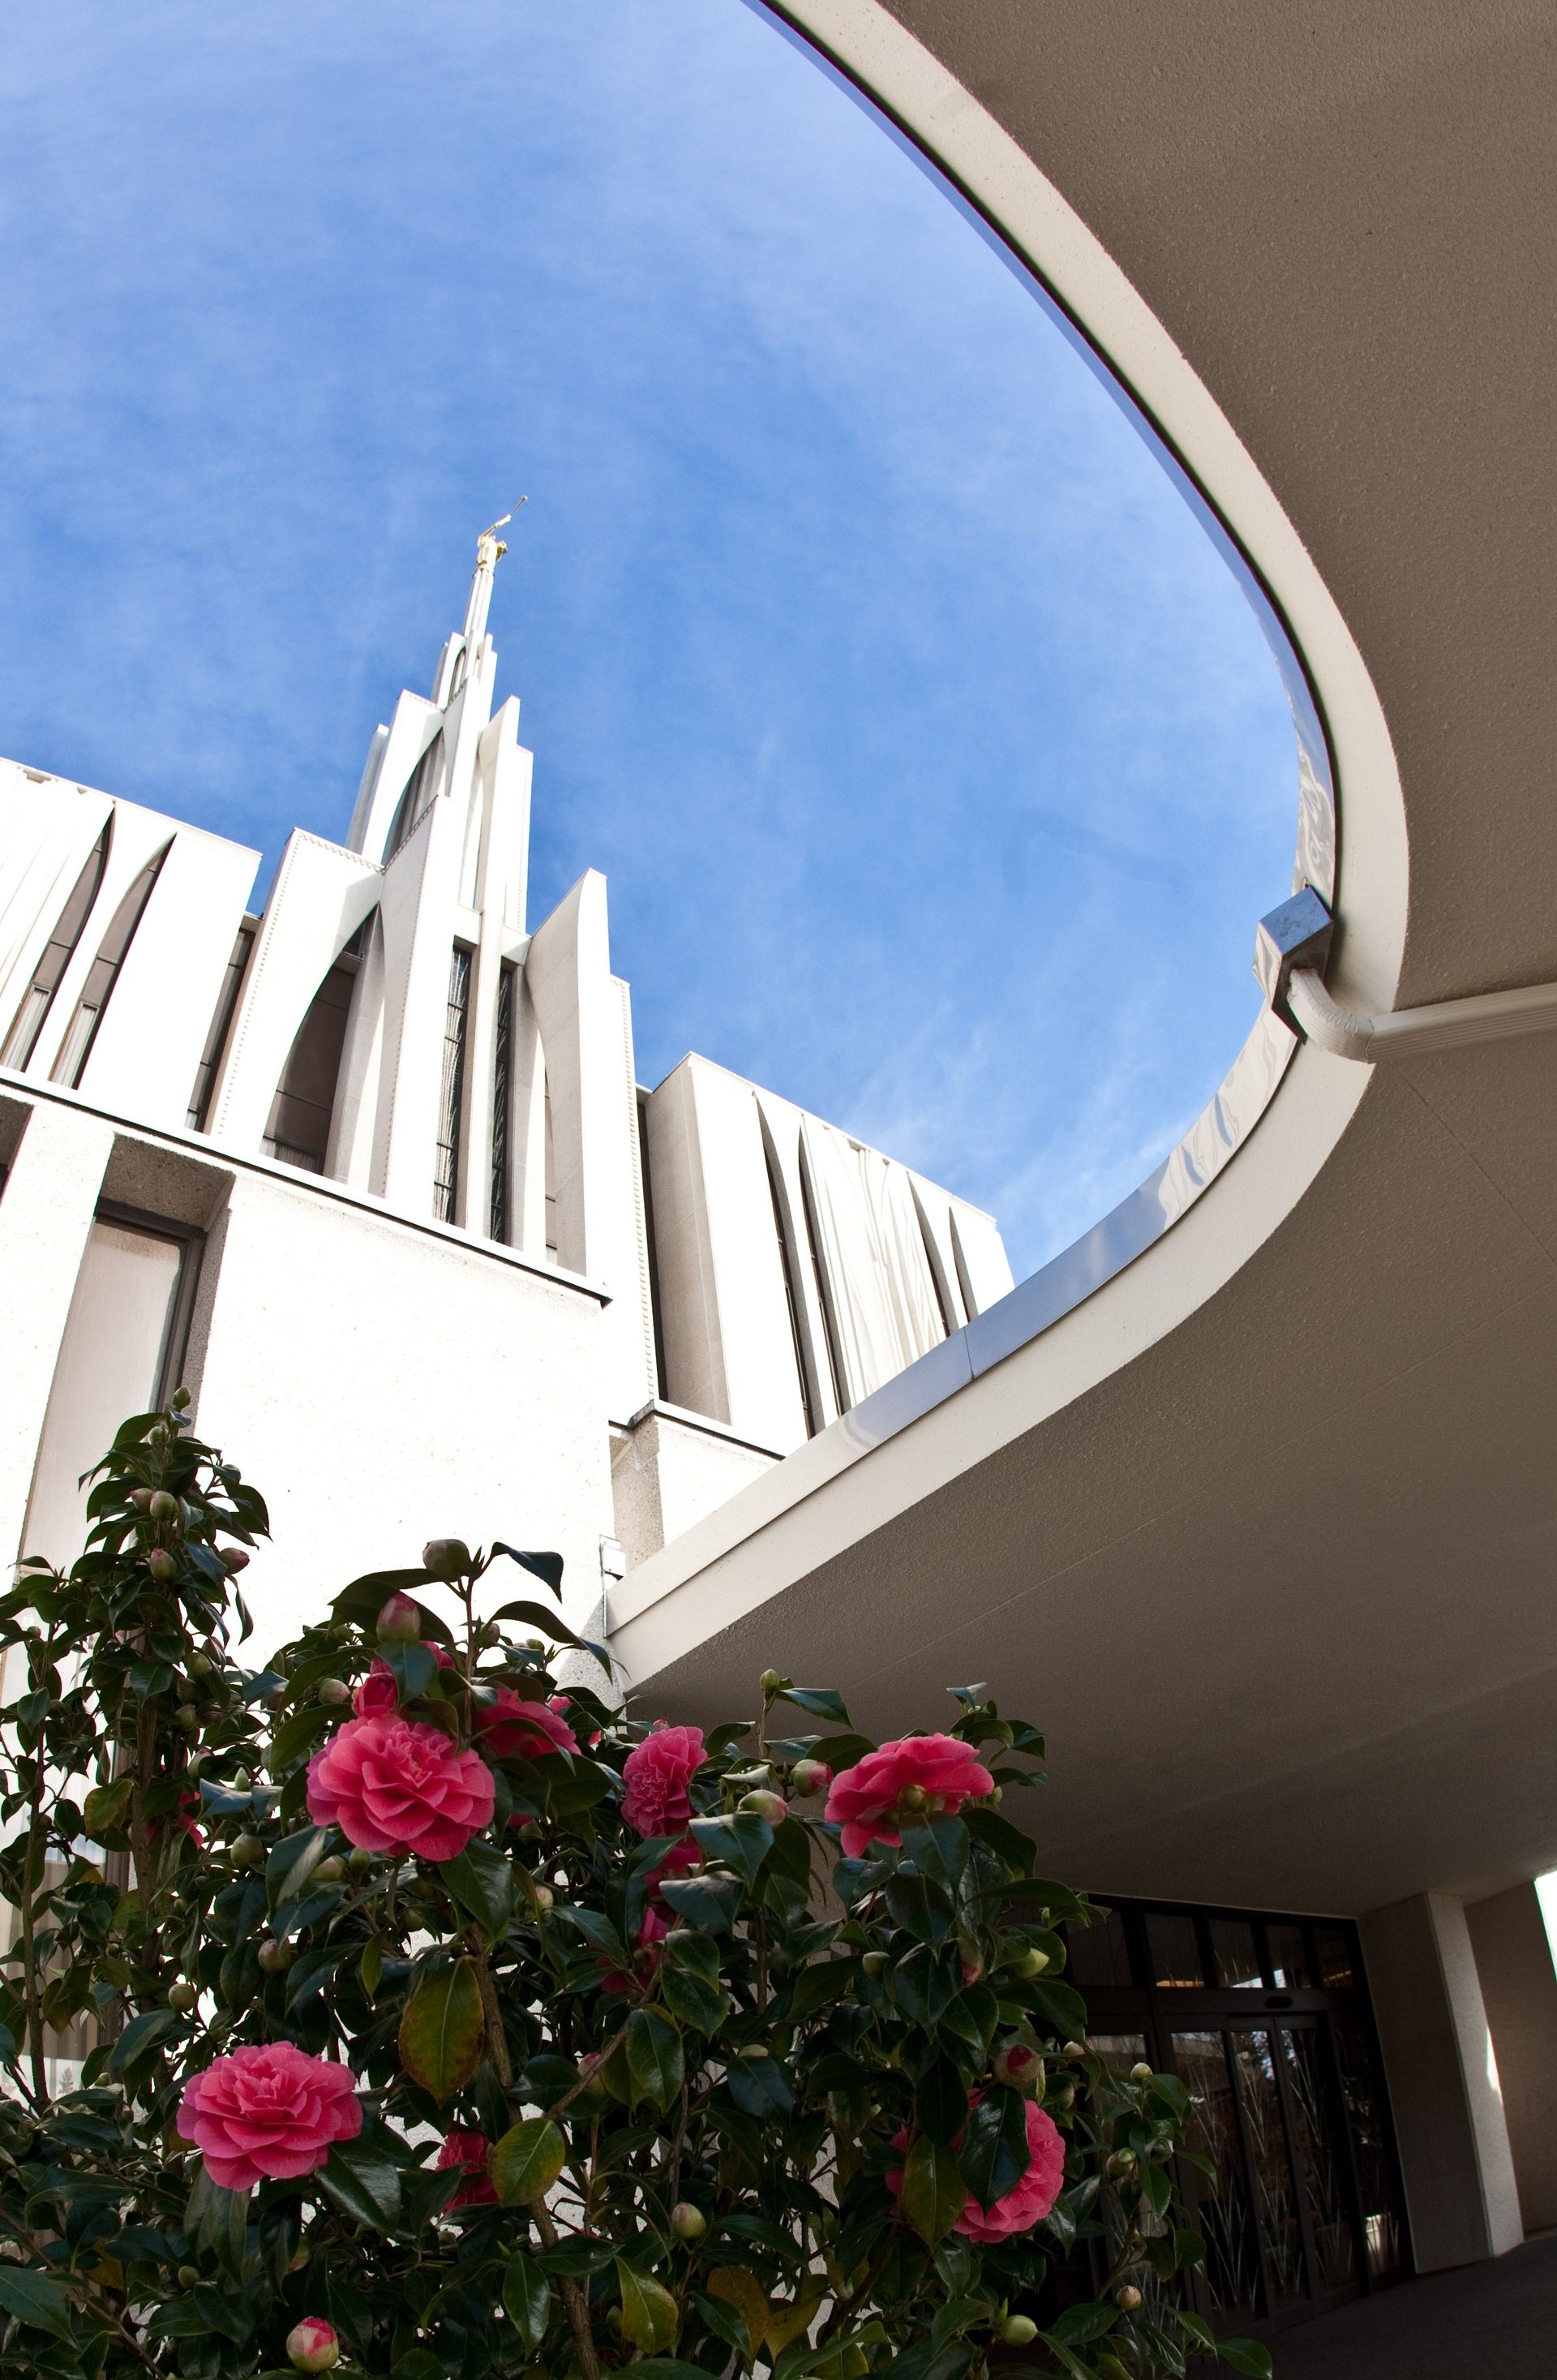 The Seattle Washington Temple, including the entrance, spire, and scenery.